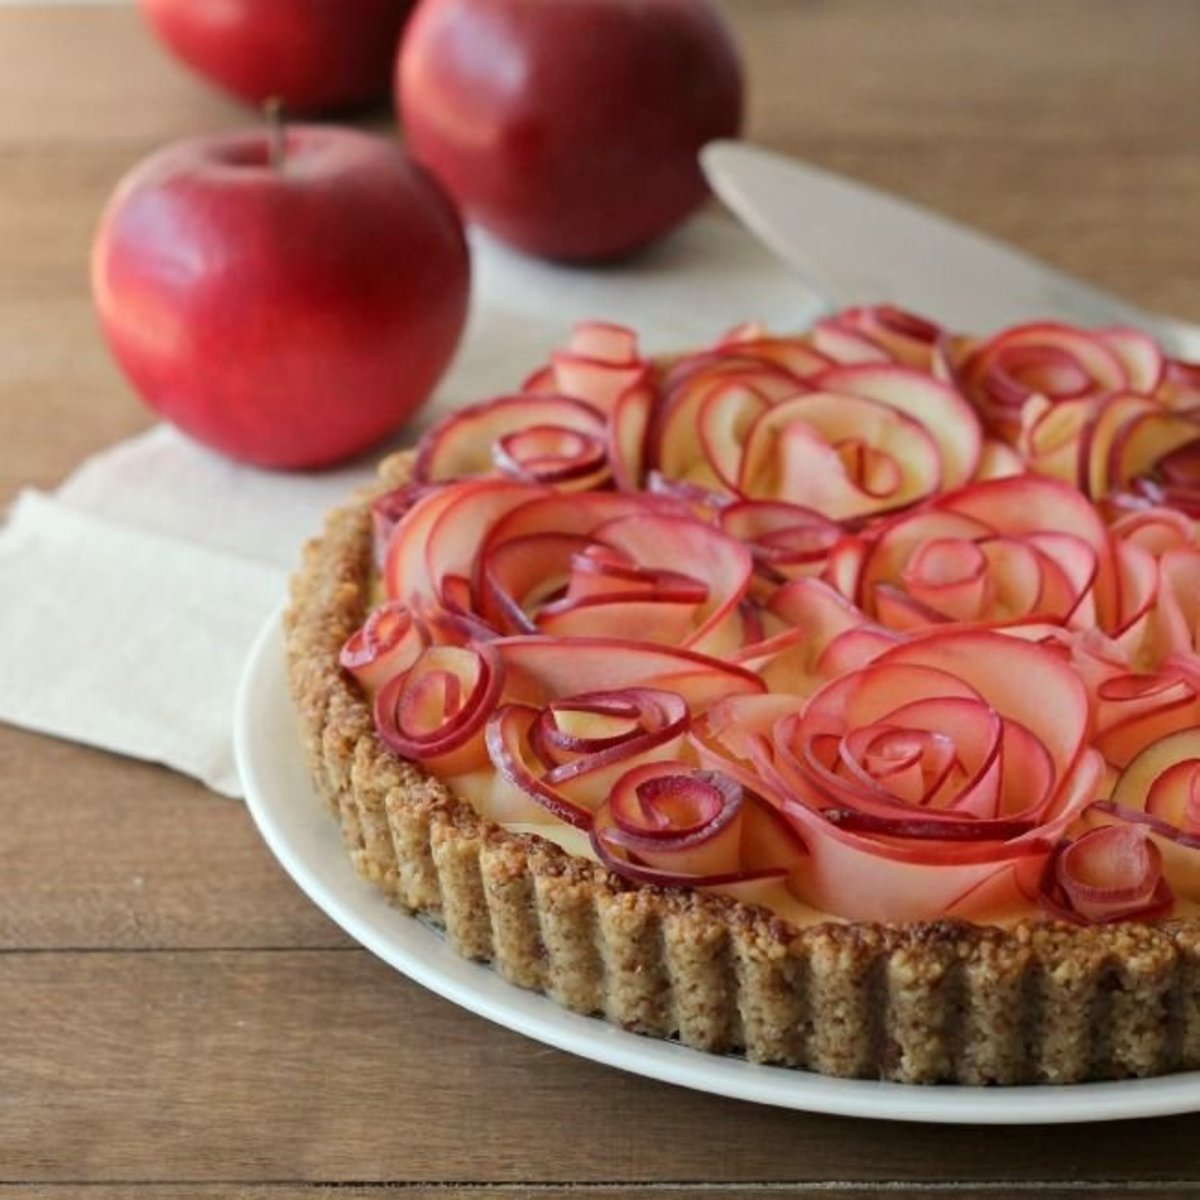 Looking for an impressive dessert centerpiece for Thanksgiving? This apple rose tart is just the thing. 